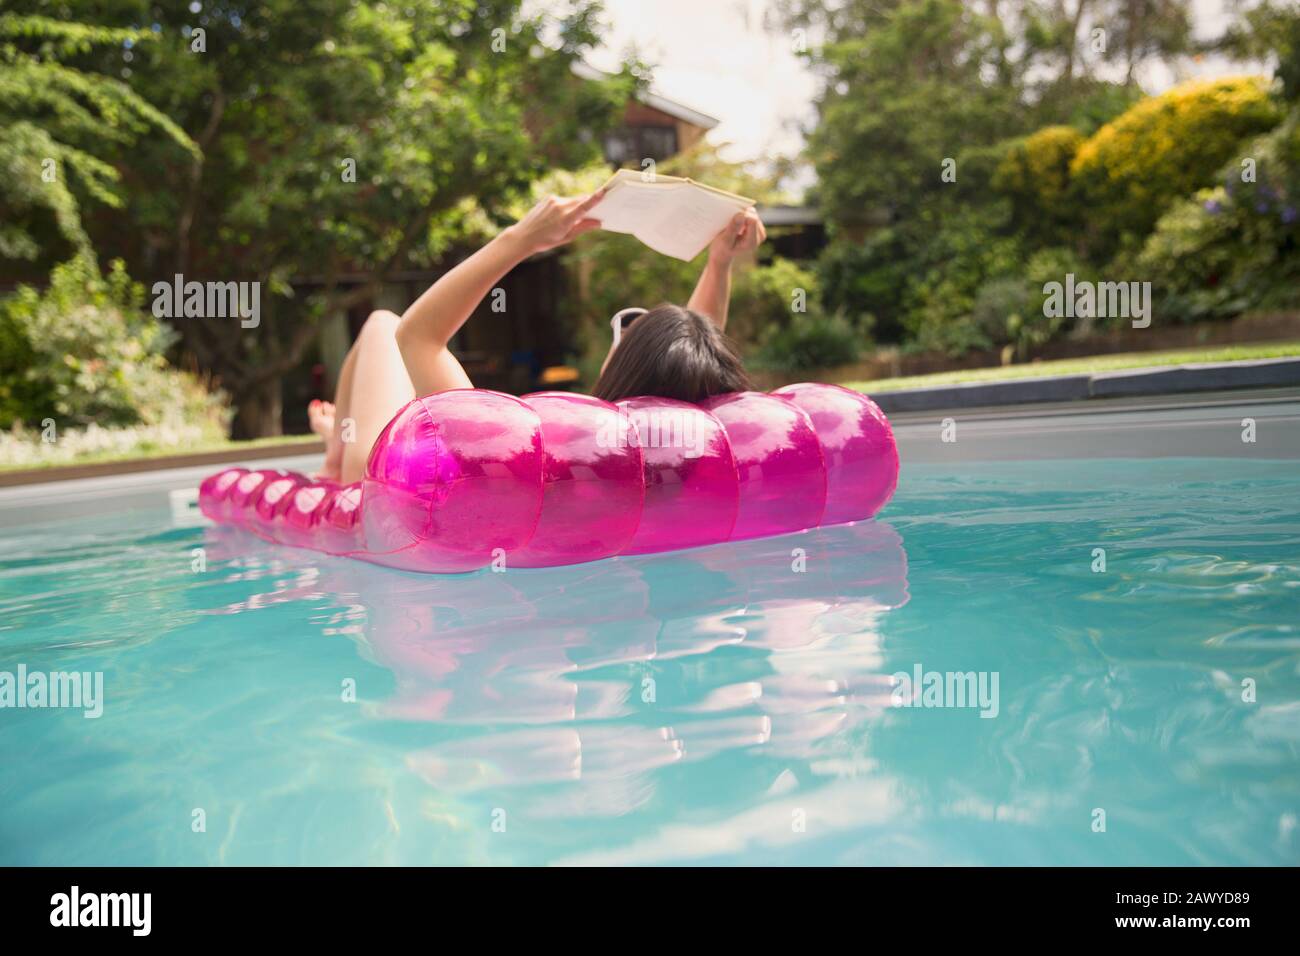 Woman reading book on inflatable raft in sunny summer swimming pool Stock Photo